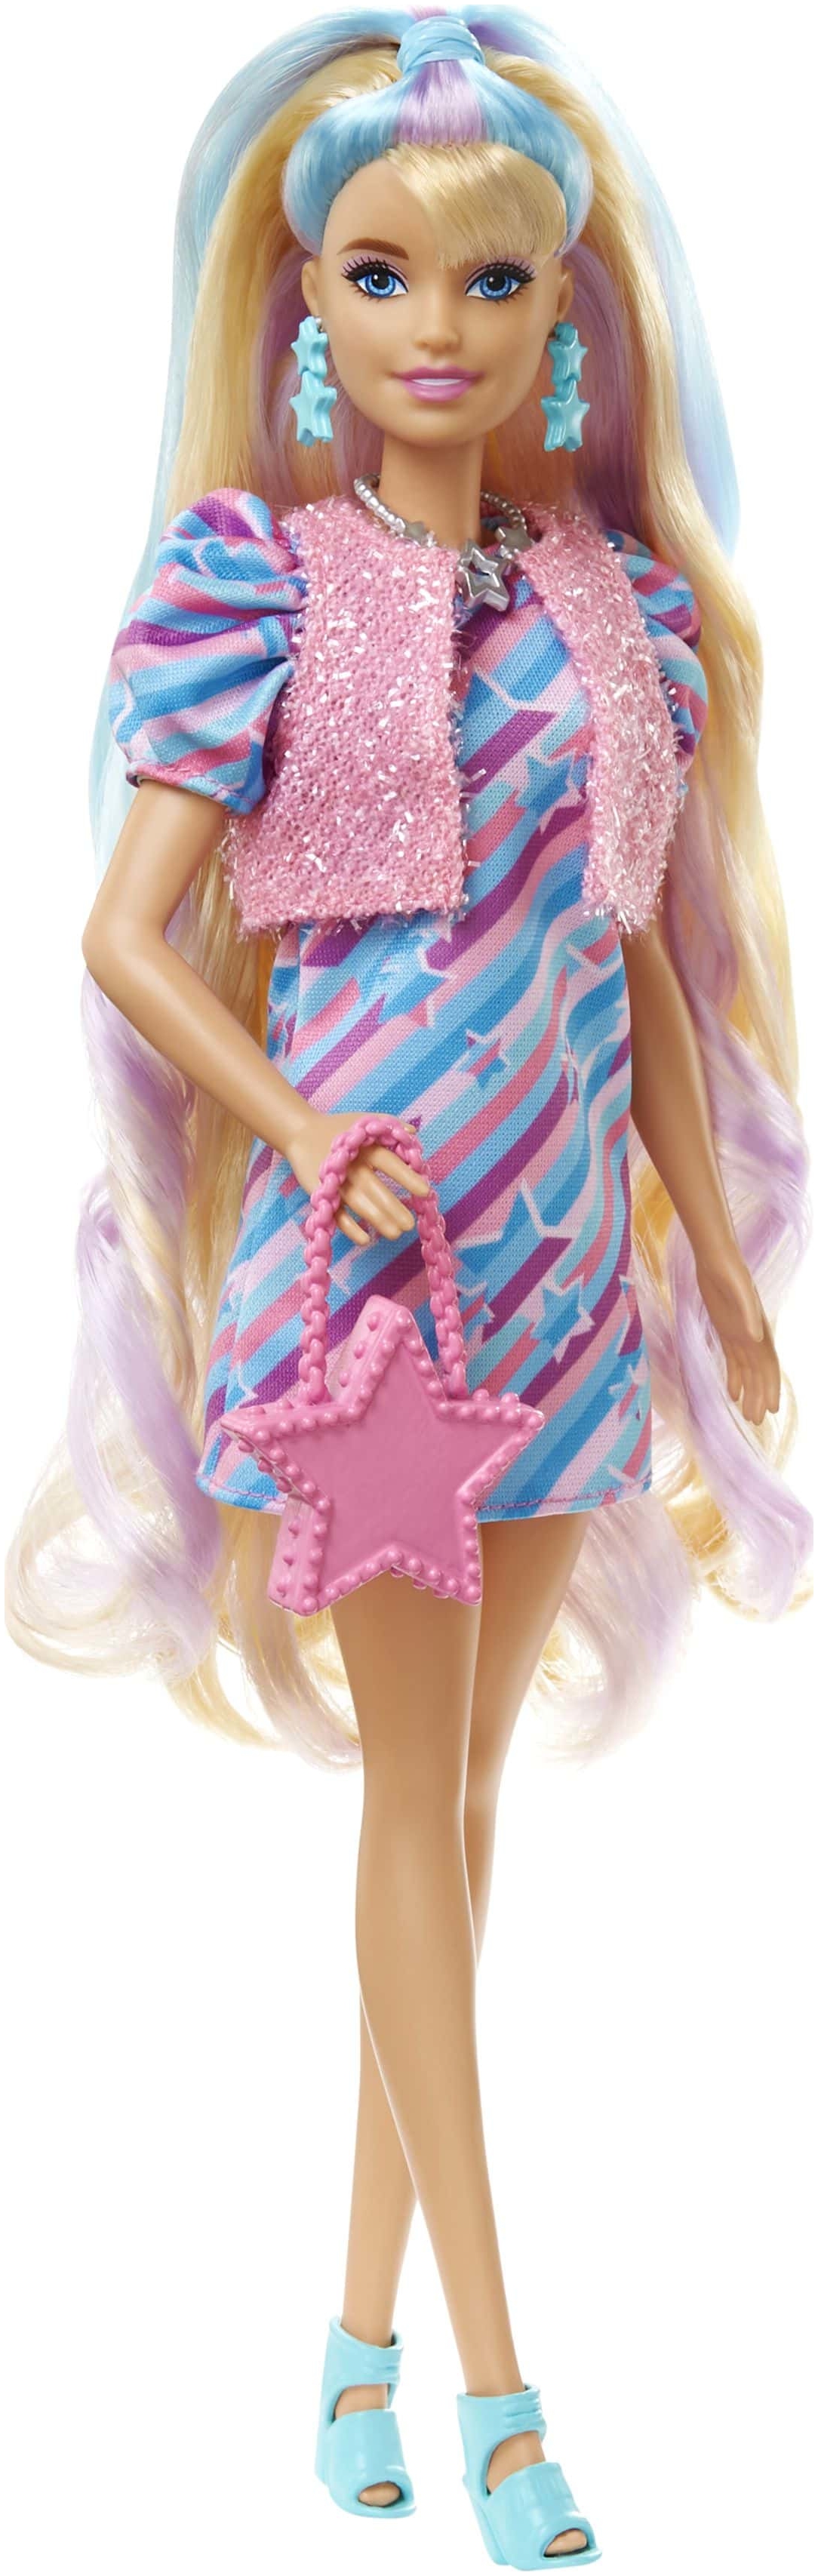 New Barbie Totally Hair dolls 2022 - YouLoveIt.com